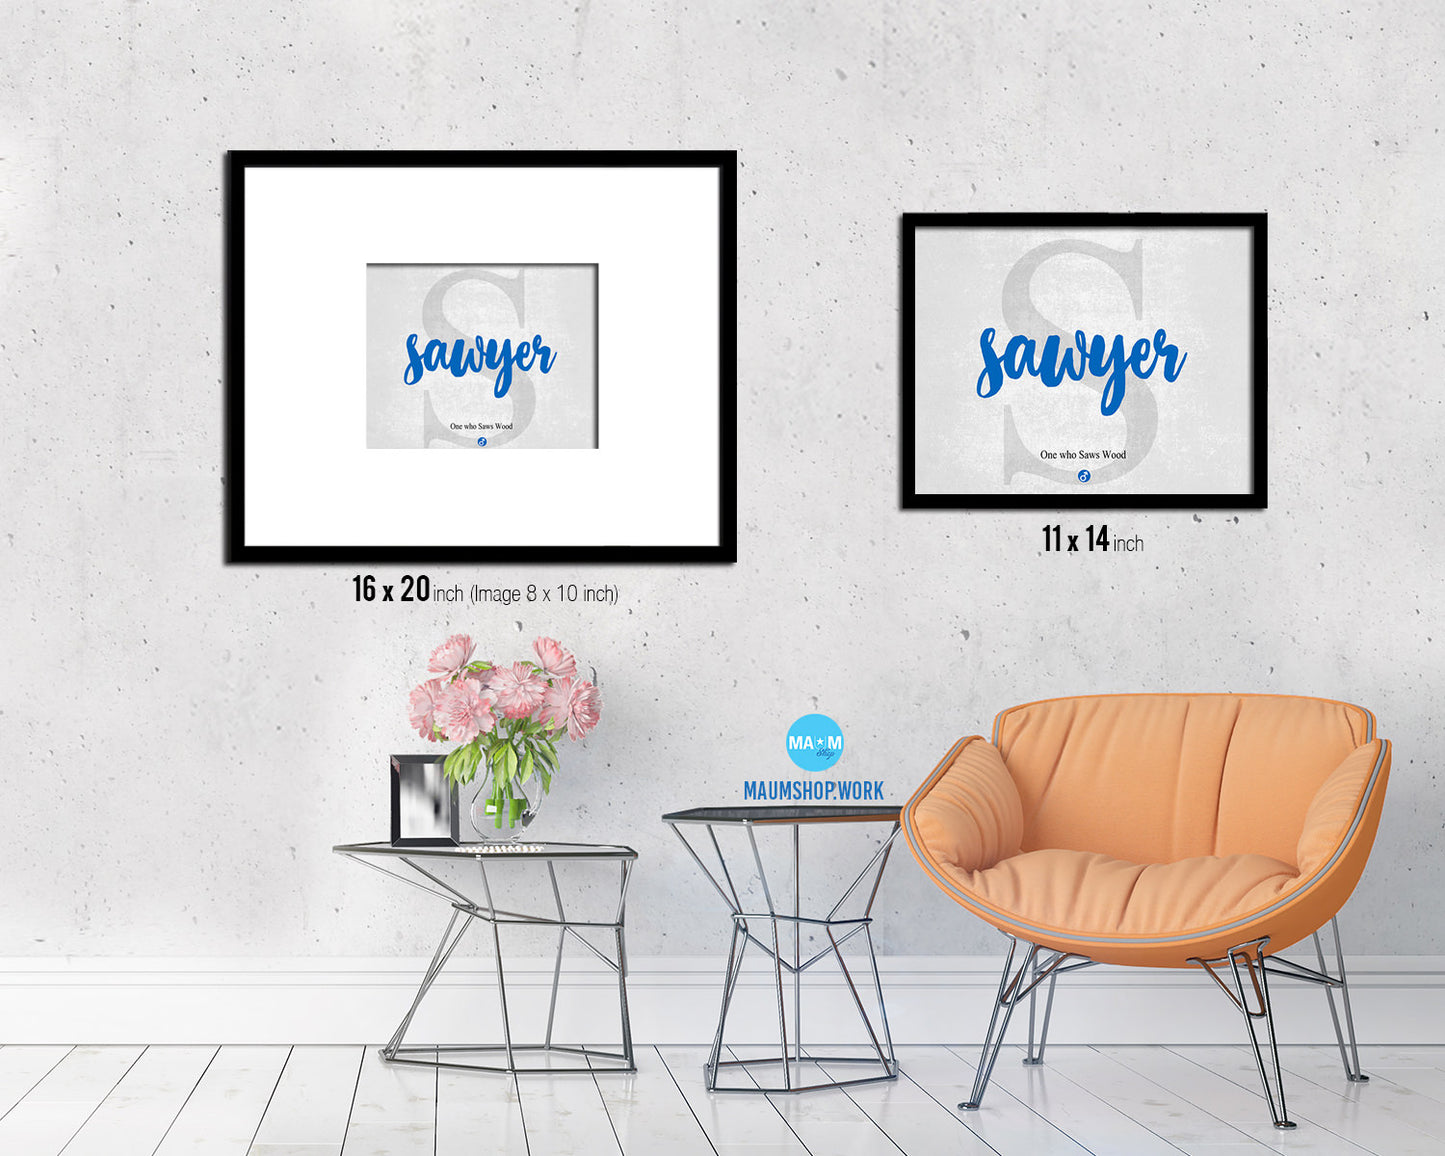 Sawyer Personalized Biblical Name Plate Art Framed Print Kids Baby Room Wall Decor Gifts